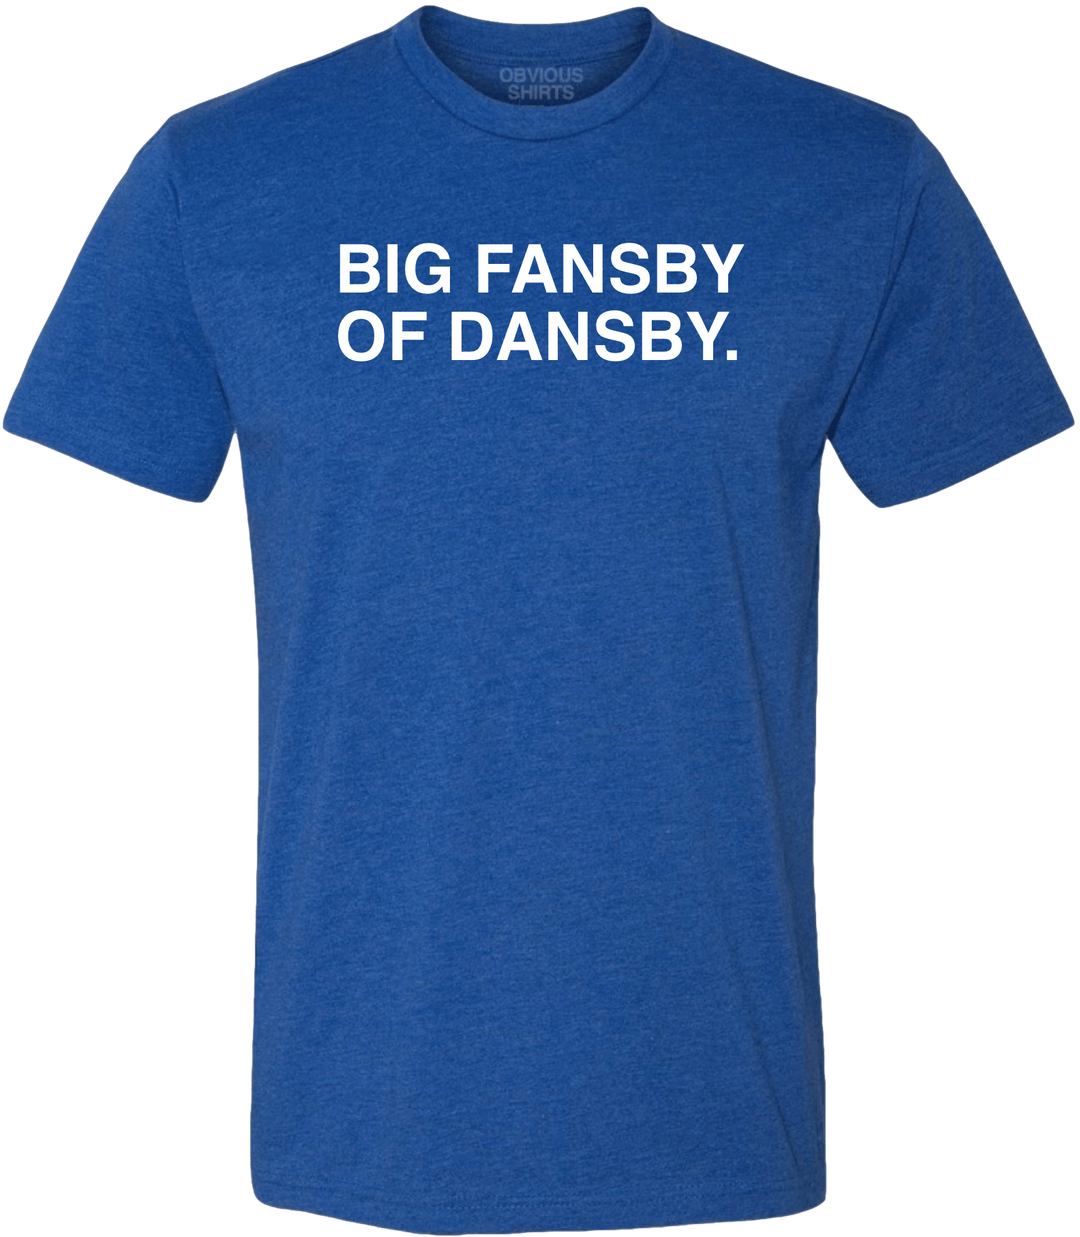 BIG FANSBY OF DANSBY. - OBVIOUS SHIRTS